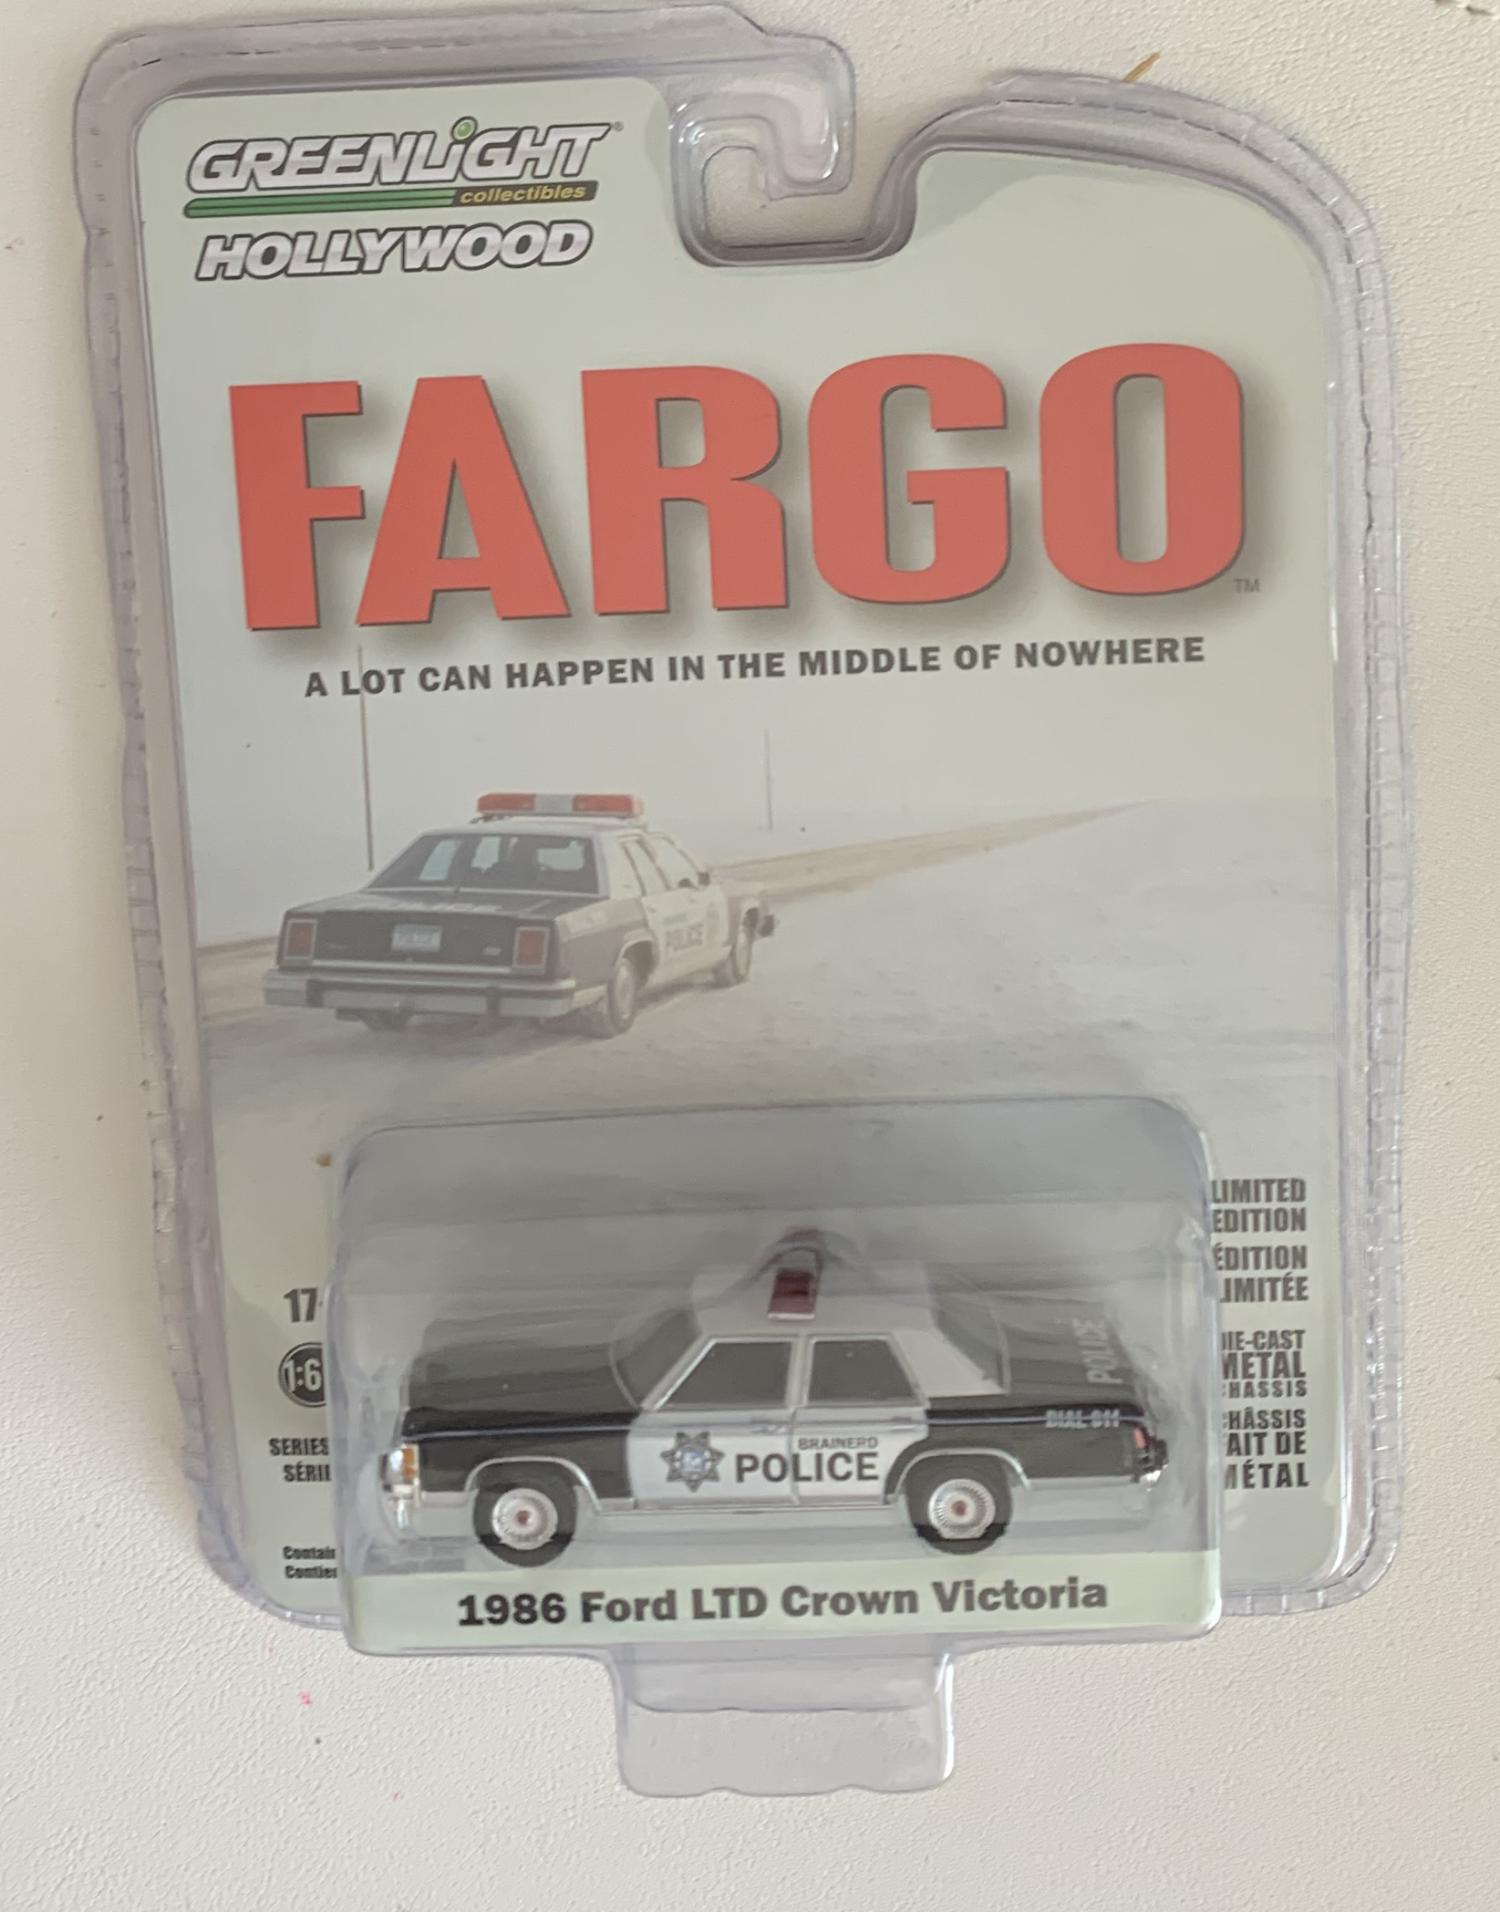 Scale Models from the American Black Comedy Drama Series